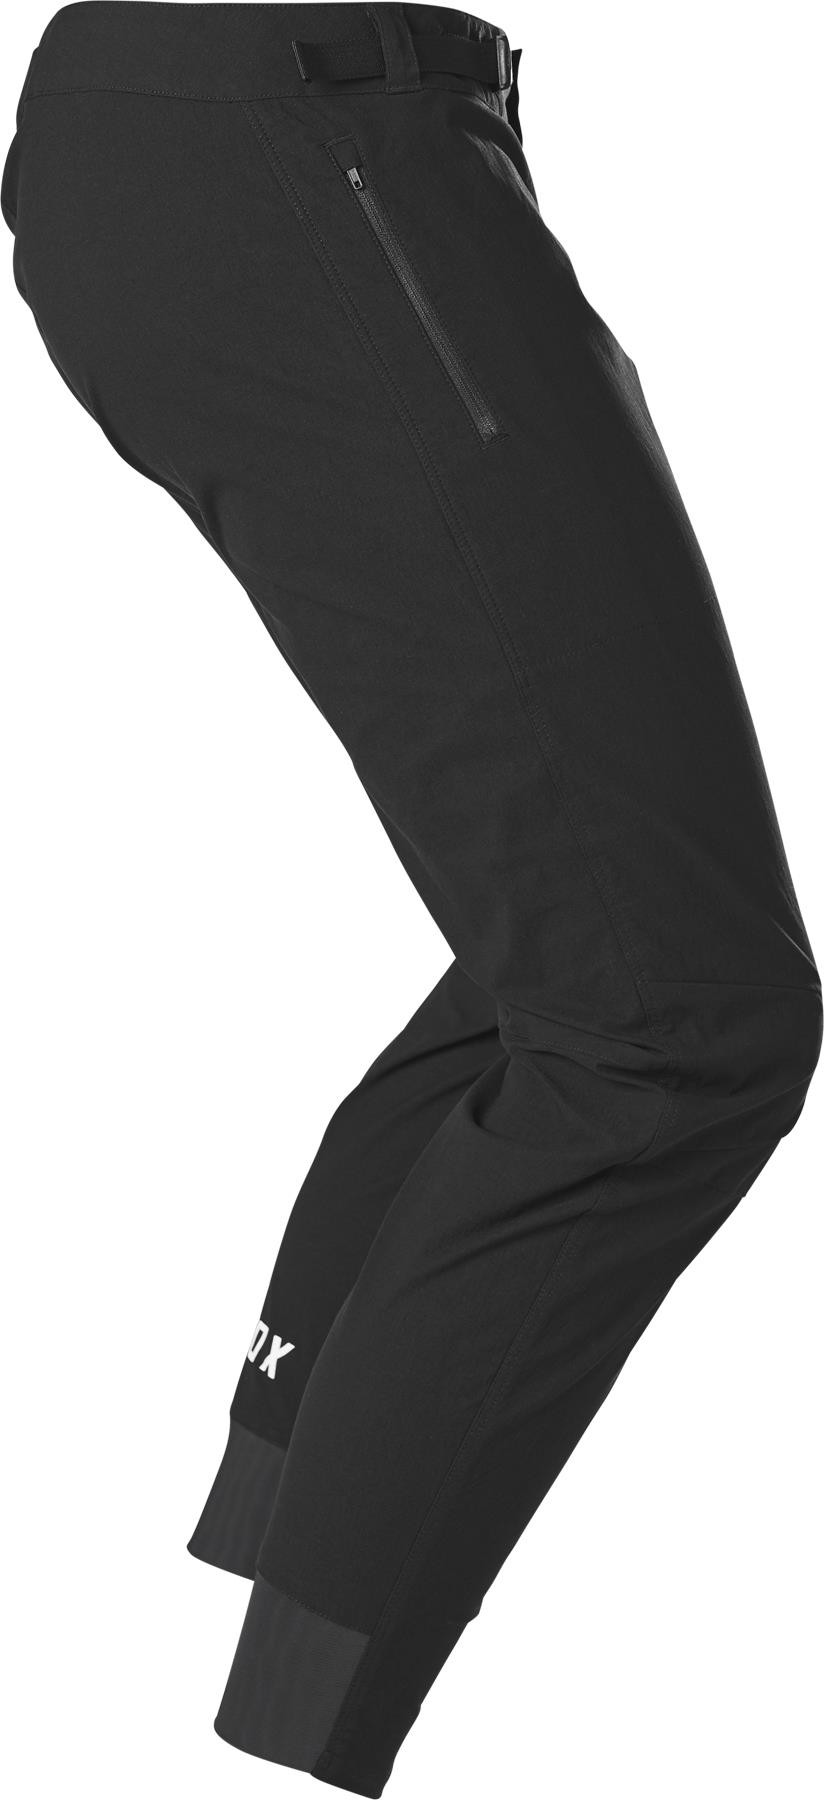 Ranger Youth MTB Cycling Trousers image 2